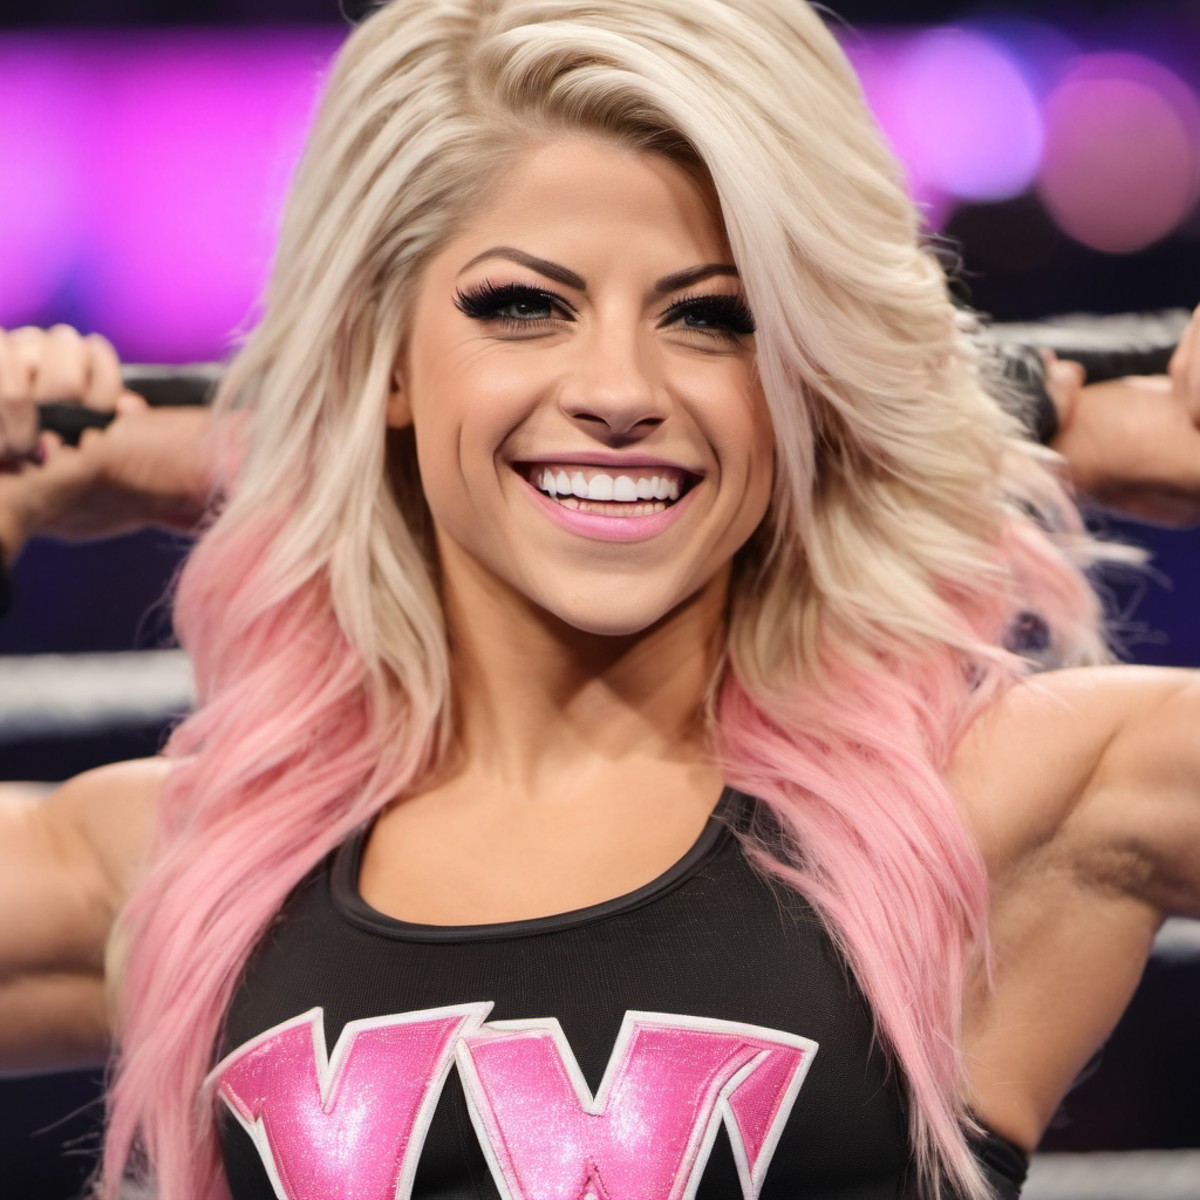 photo of a woman in a gym wwe, blonde hair with pink tips, Alexa Bliss, dark eye makeup, big smile